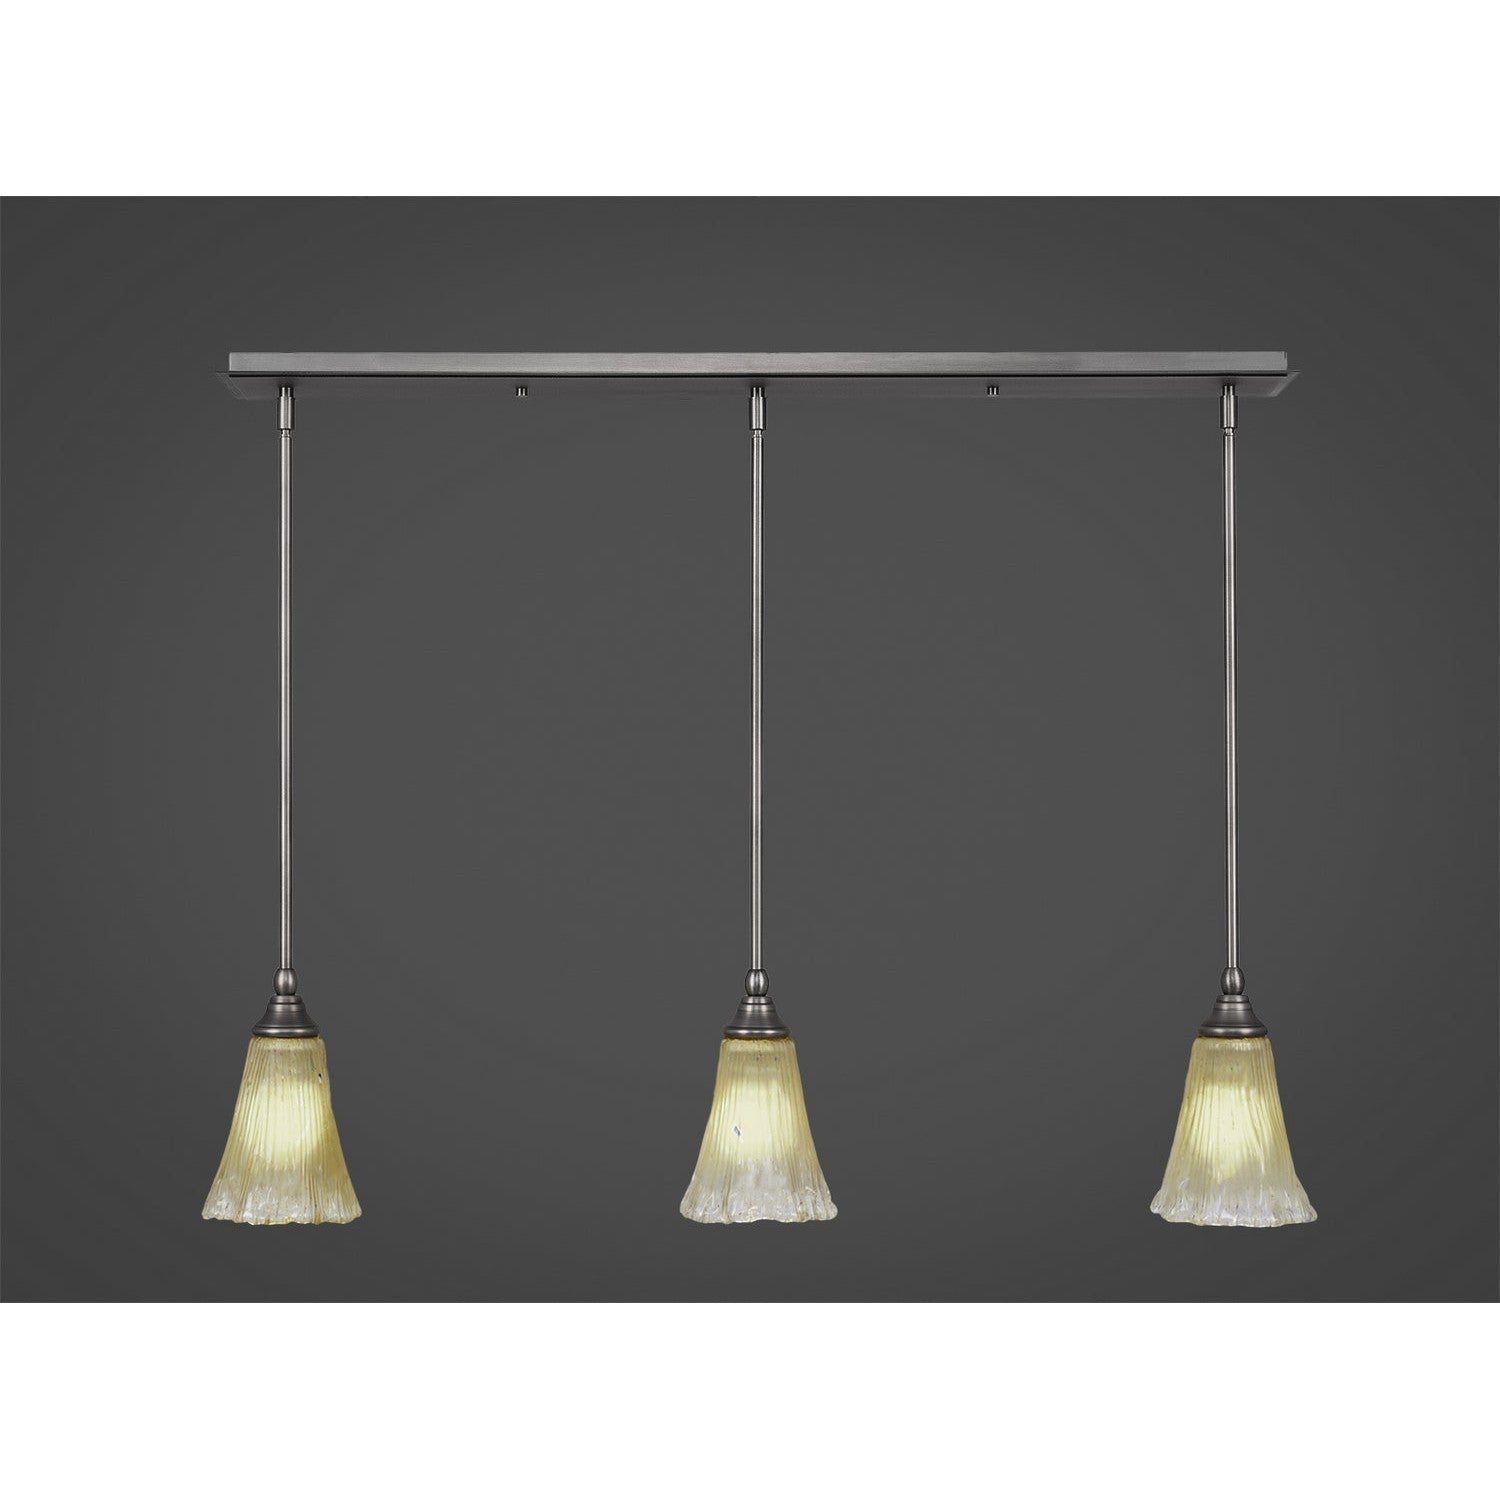 Toltec Any 36-bn-720 Pendant Light - Brushed Nickel